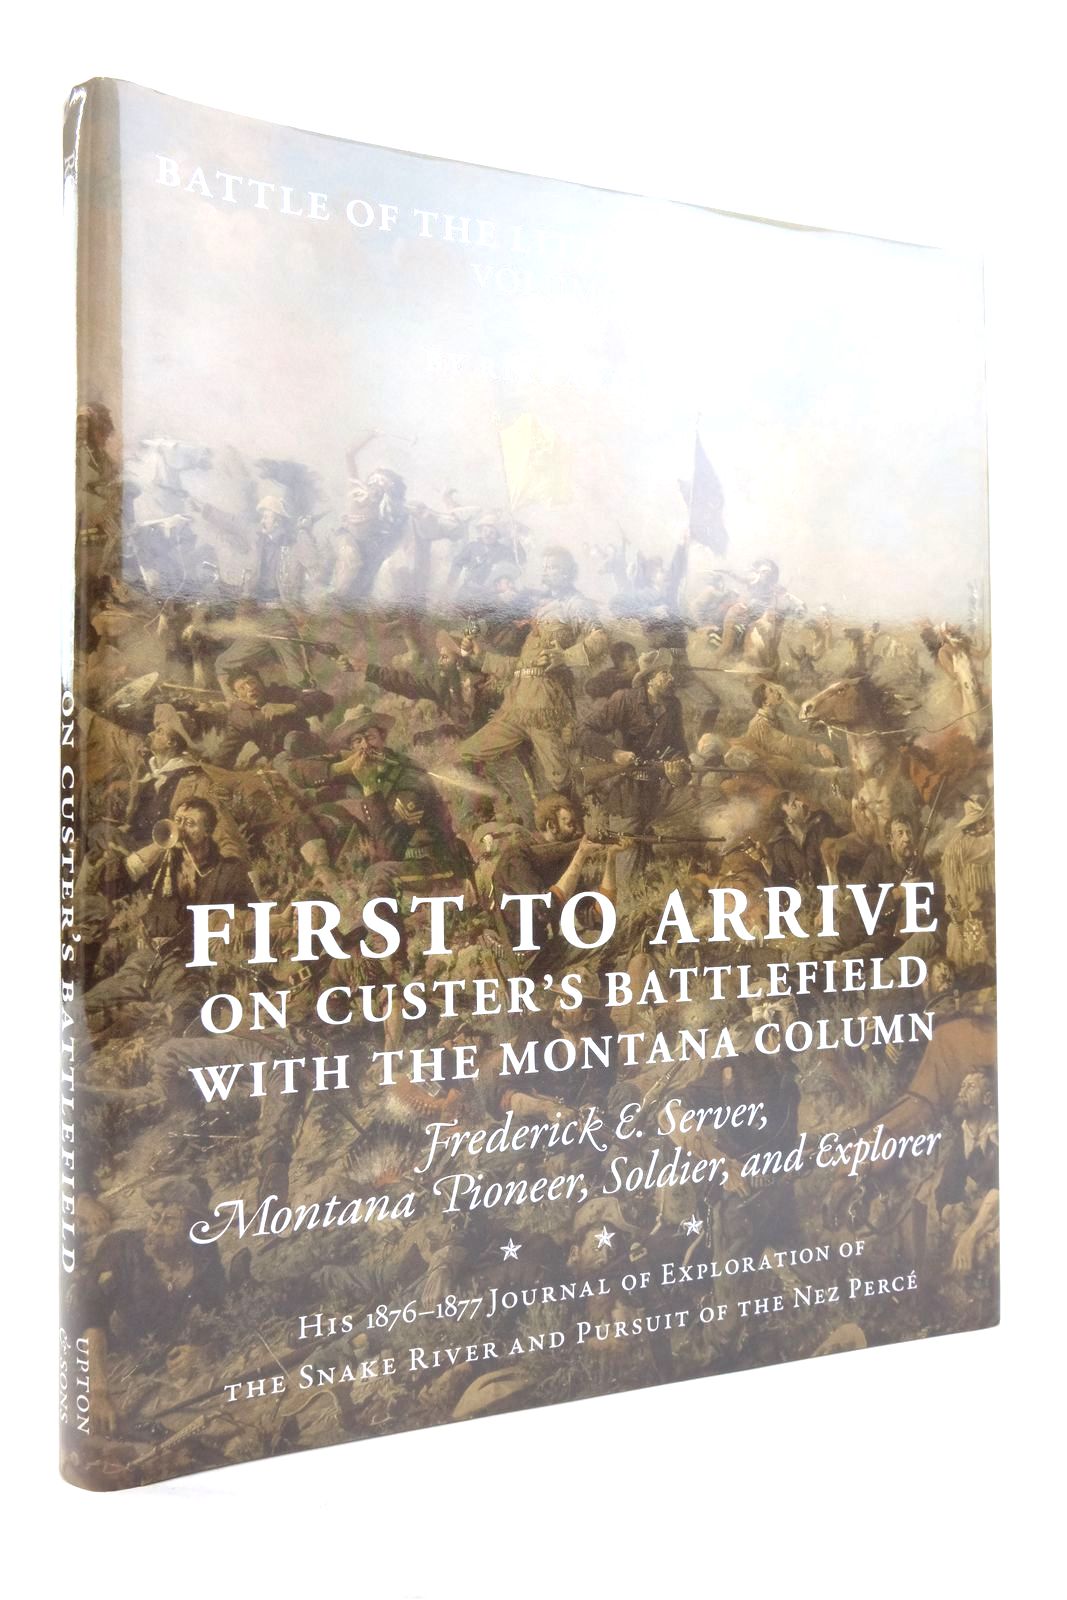 Photo of FIRST TO ARRIVE ON CUSTER'S BATTLEFIELD WITH THE MONTANA COLUMN- Stock Number: 2136604